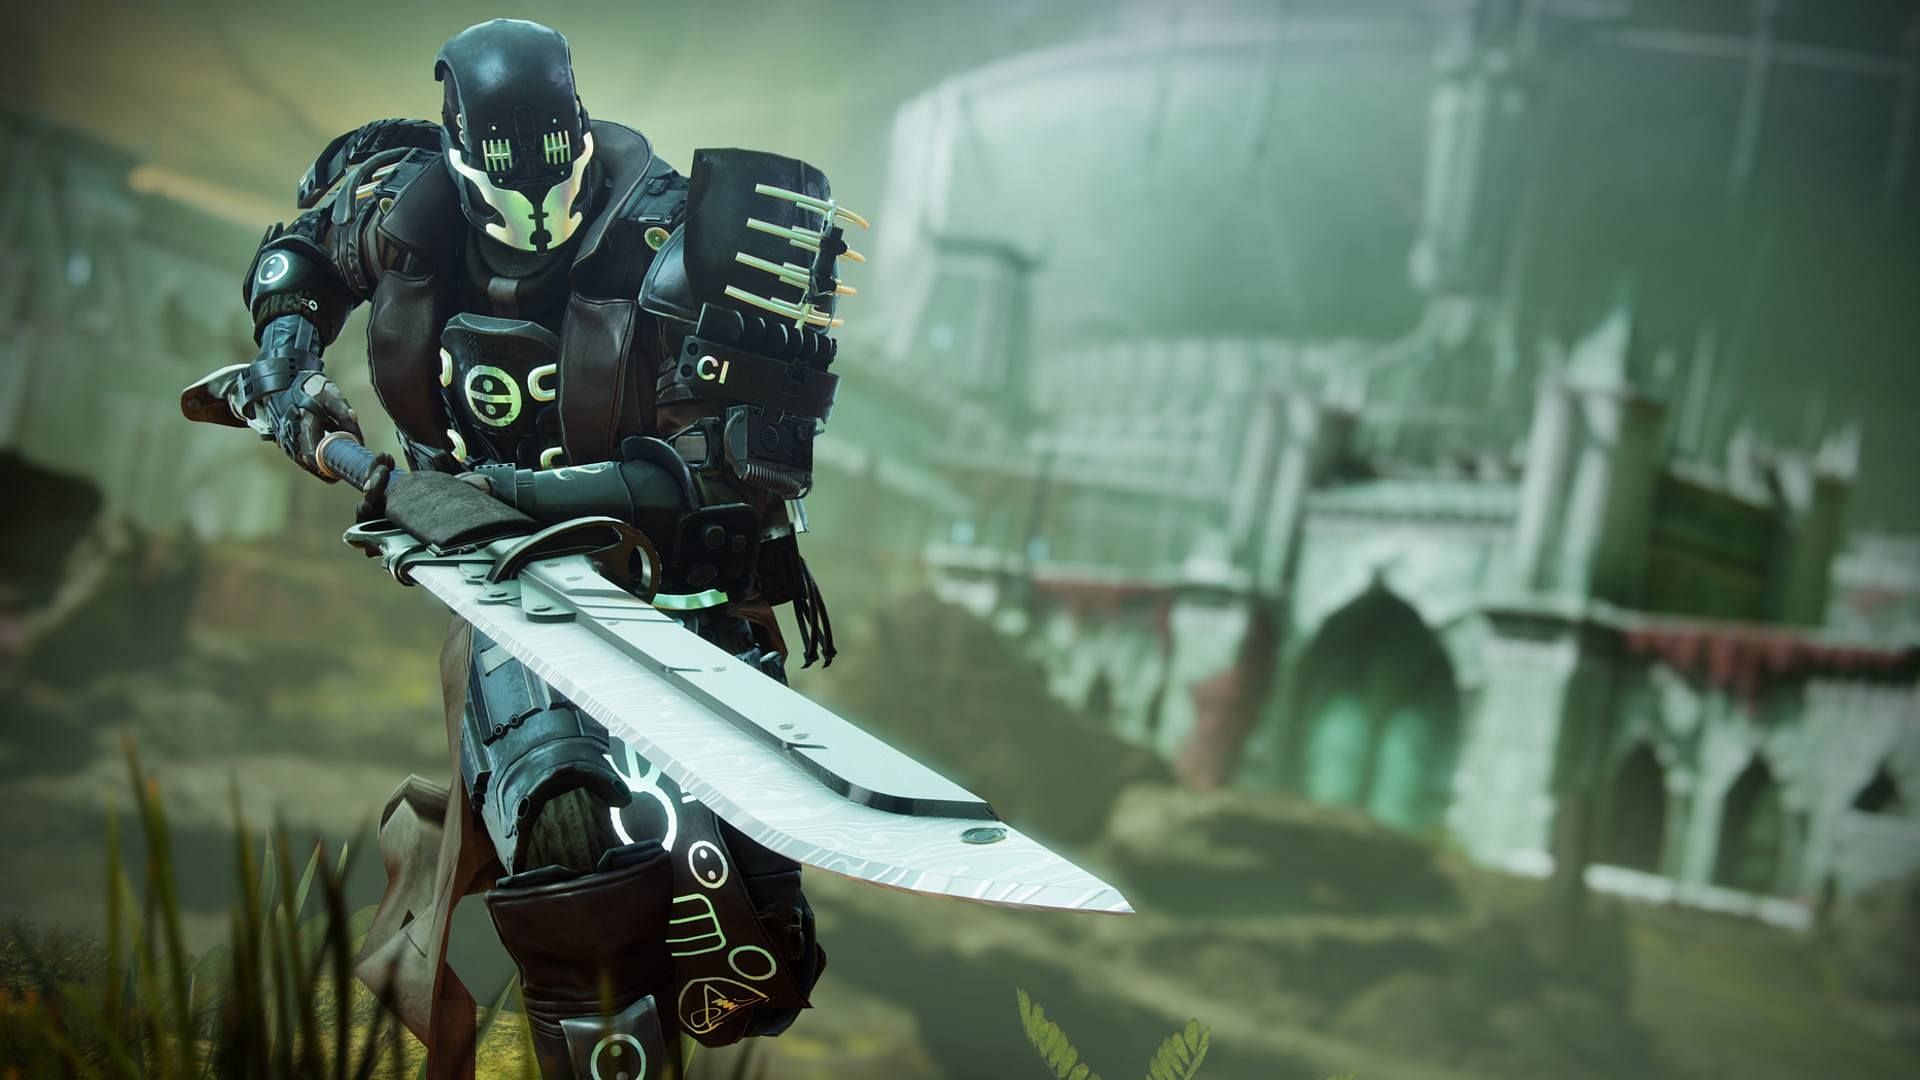 Destiny 2 The Witch Queen upcoming weapon, The Glaive (Image via Bungie)